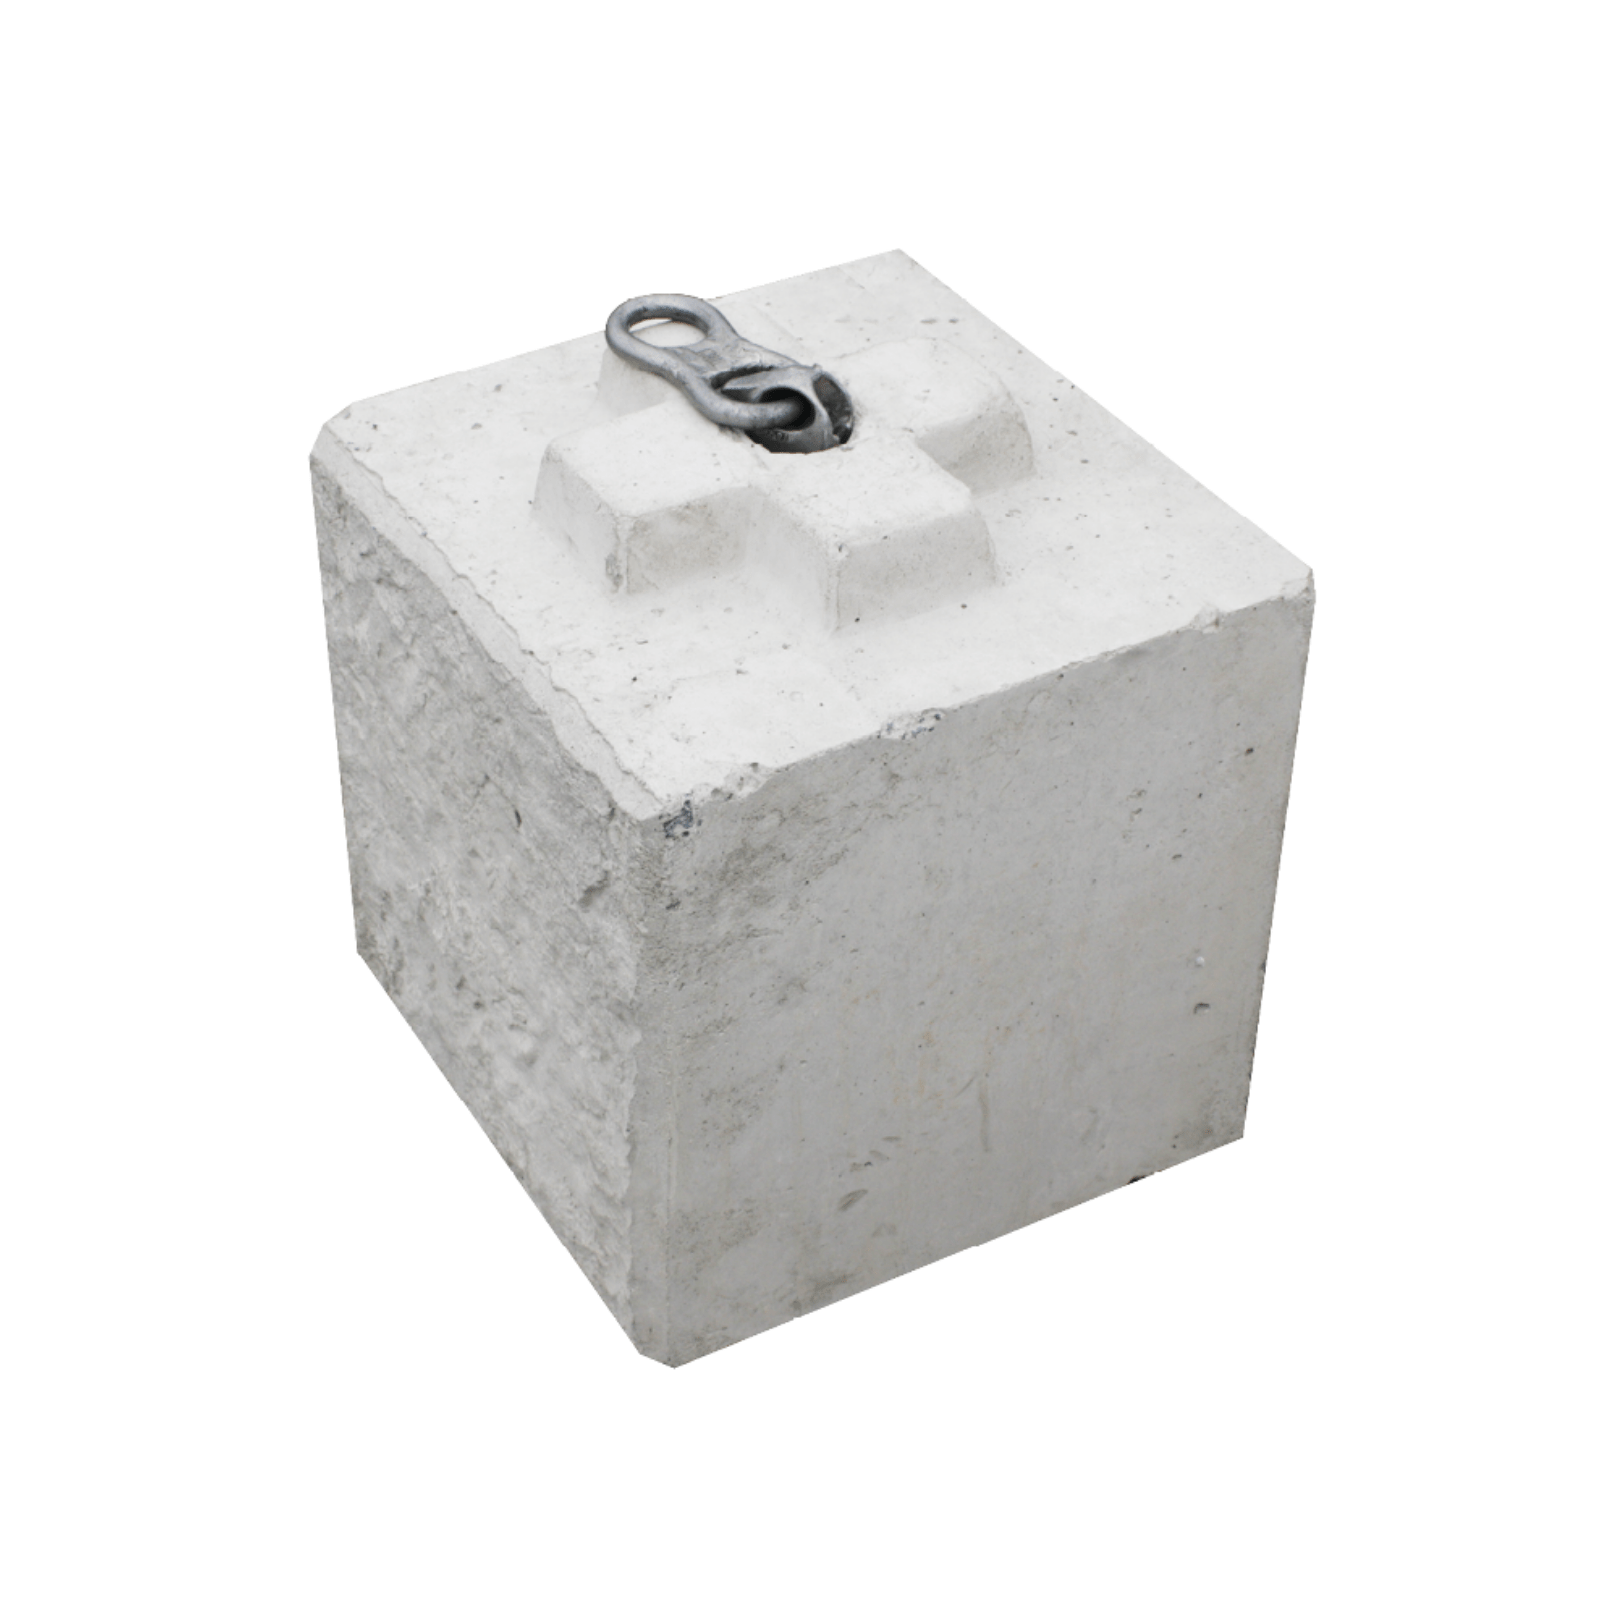 Perspective shot of a 400 standard textured Stonebloc concrete block with lifting klaw attached